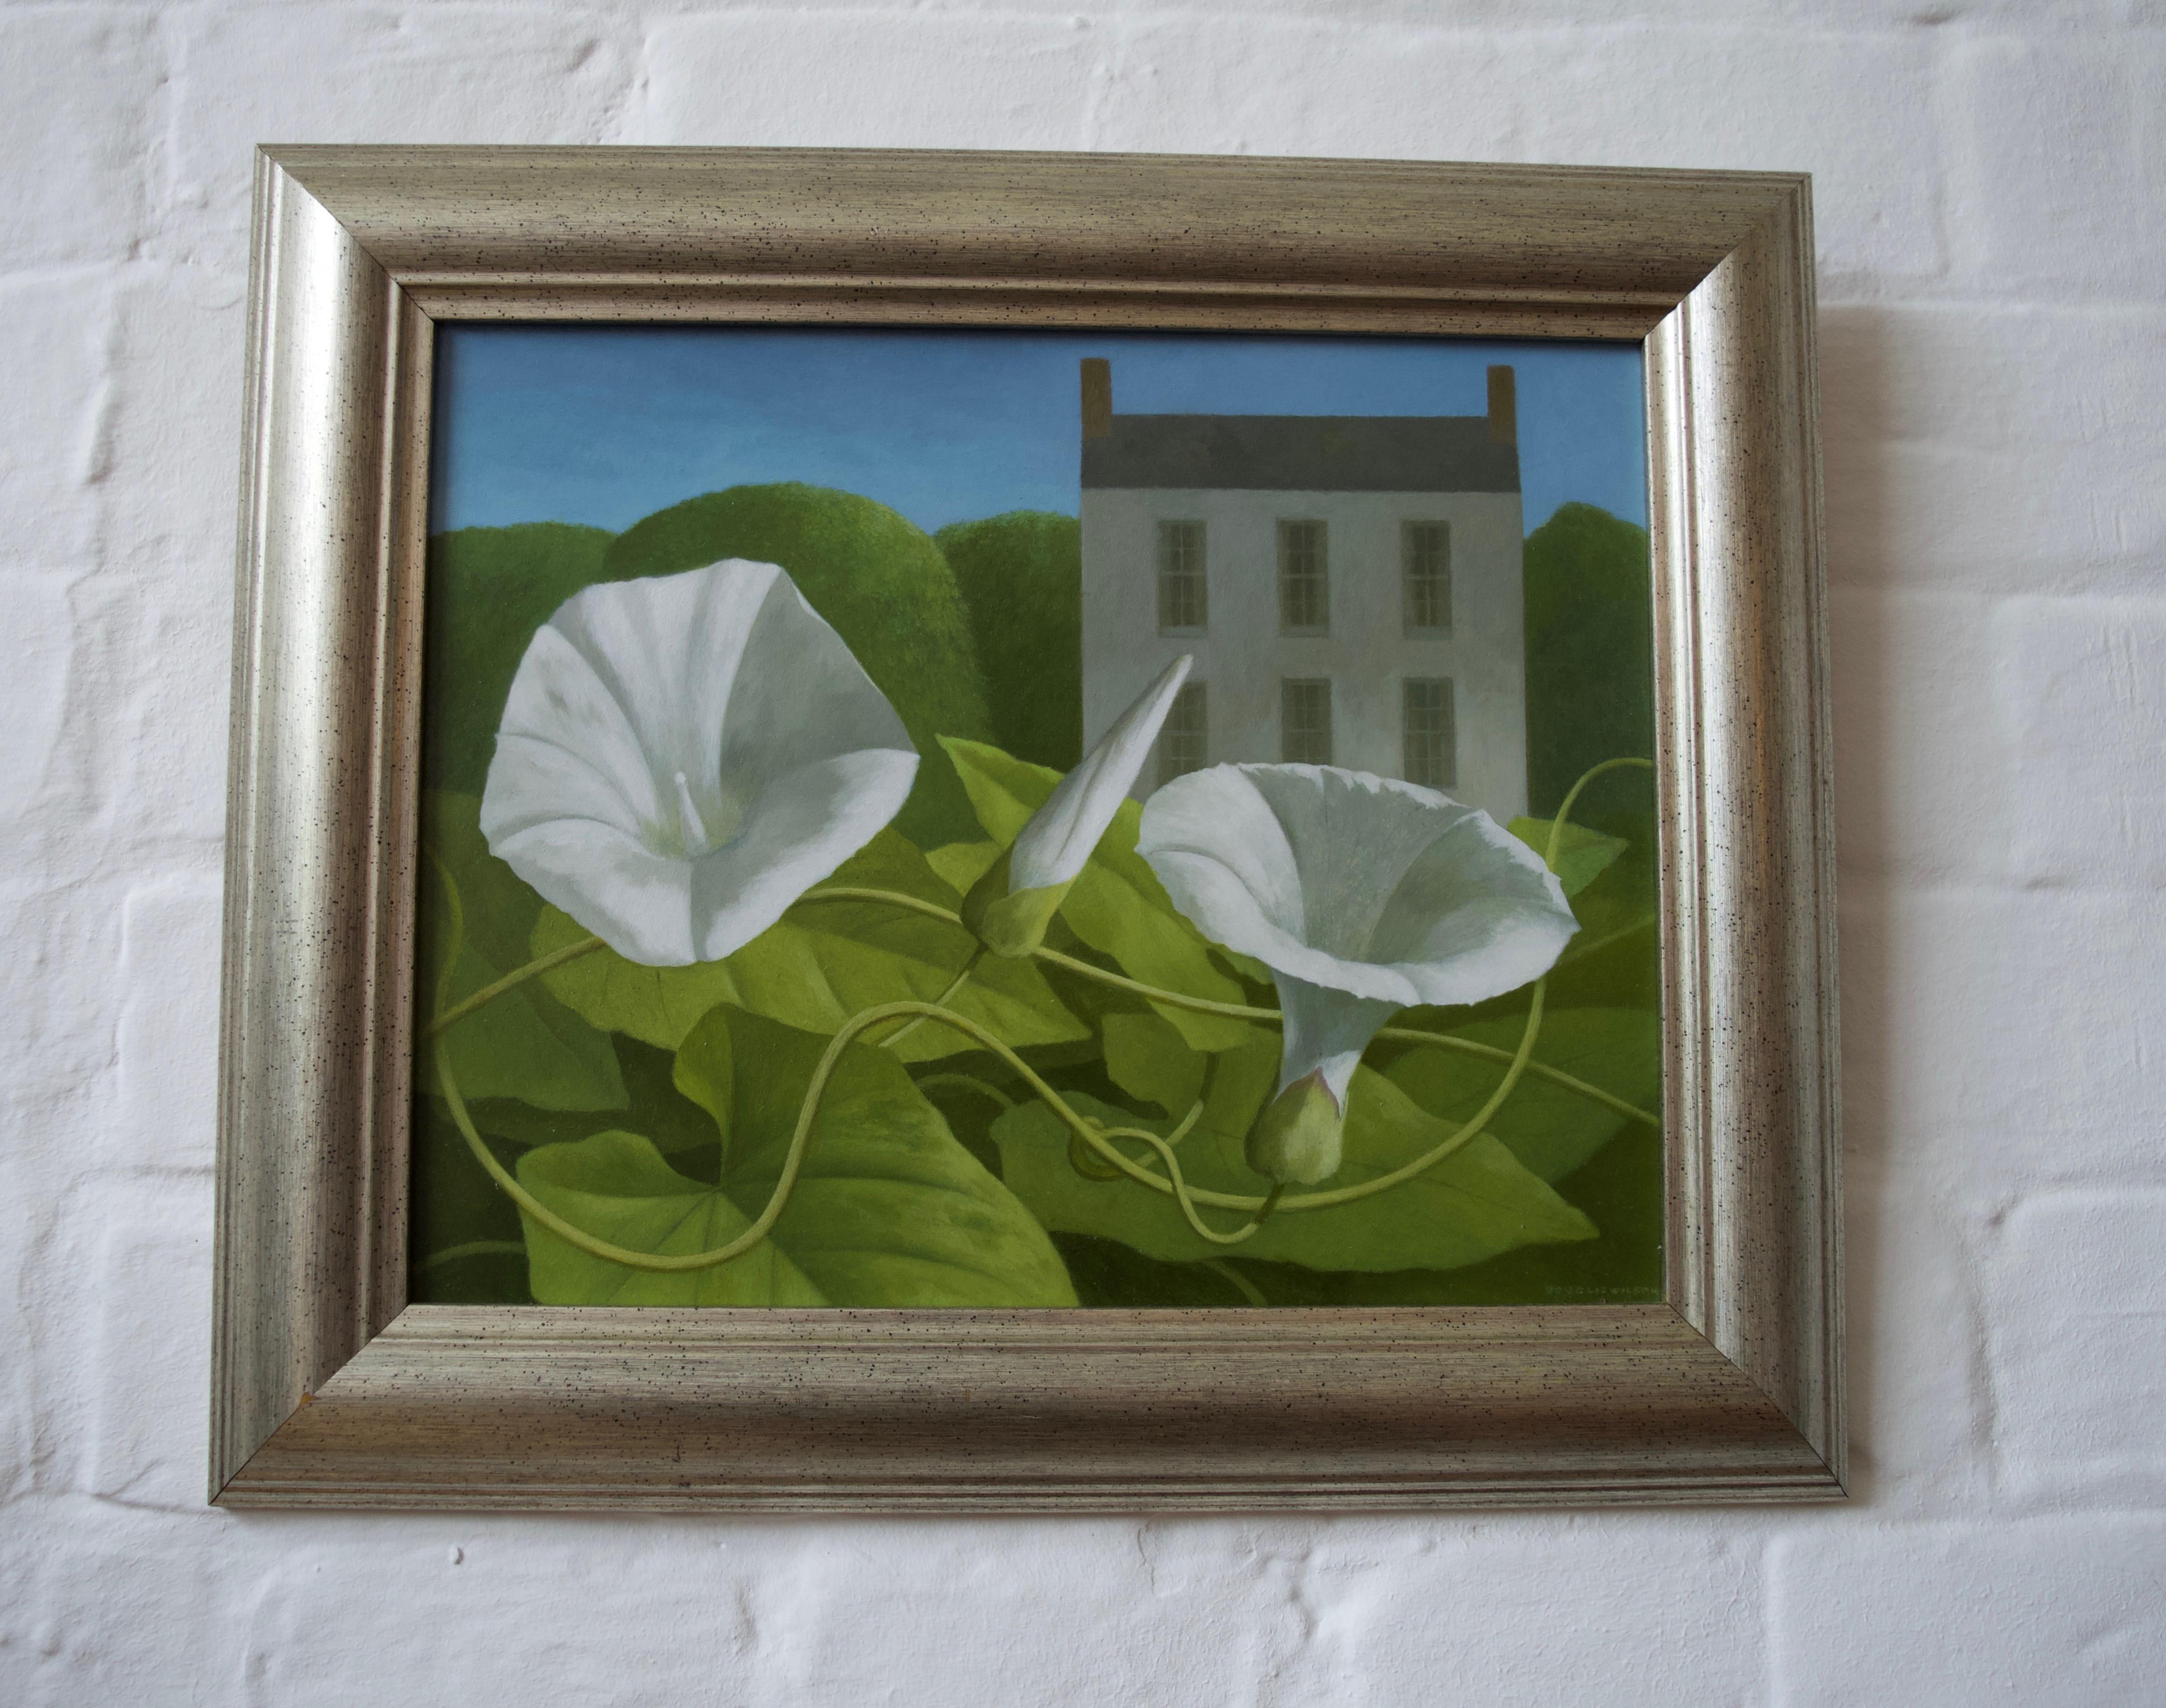 Douglas Wilson (born 1936)
Summer evening, Shropshire
Signed, inscribed with title on old label to reverse
Oil on board
9½ x 11¾ inches
13 x 15¼ inches with frame

A very striking image with the beautiful trumpet-like flowers of the hedge bindweed